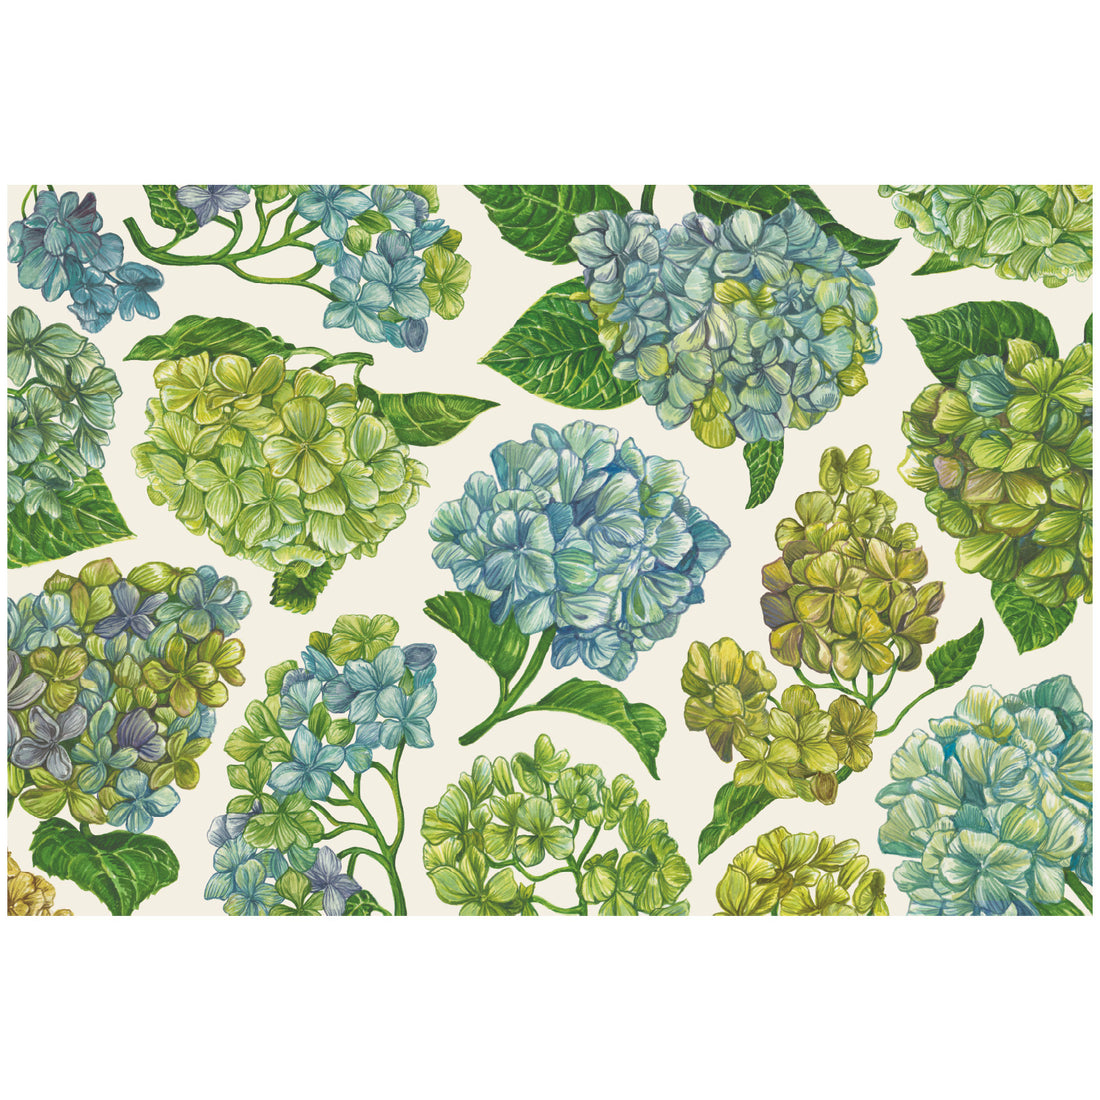 Green and blue illustrated hydrangea blossoms scattered over a white background. 